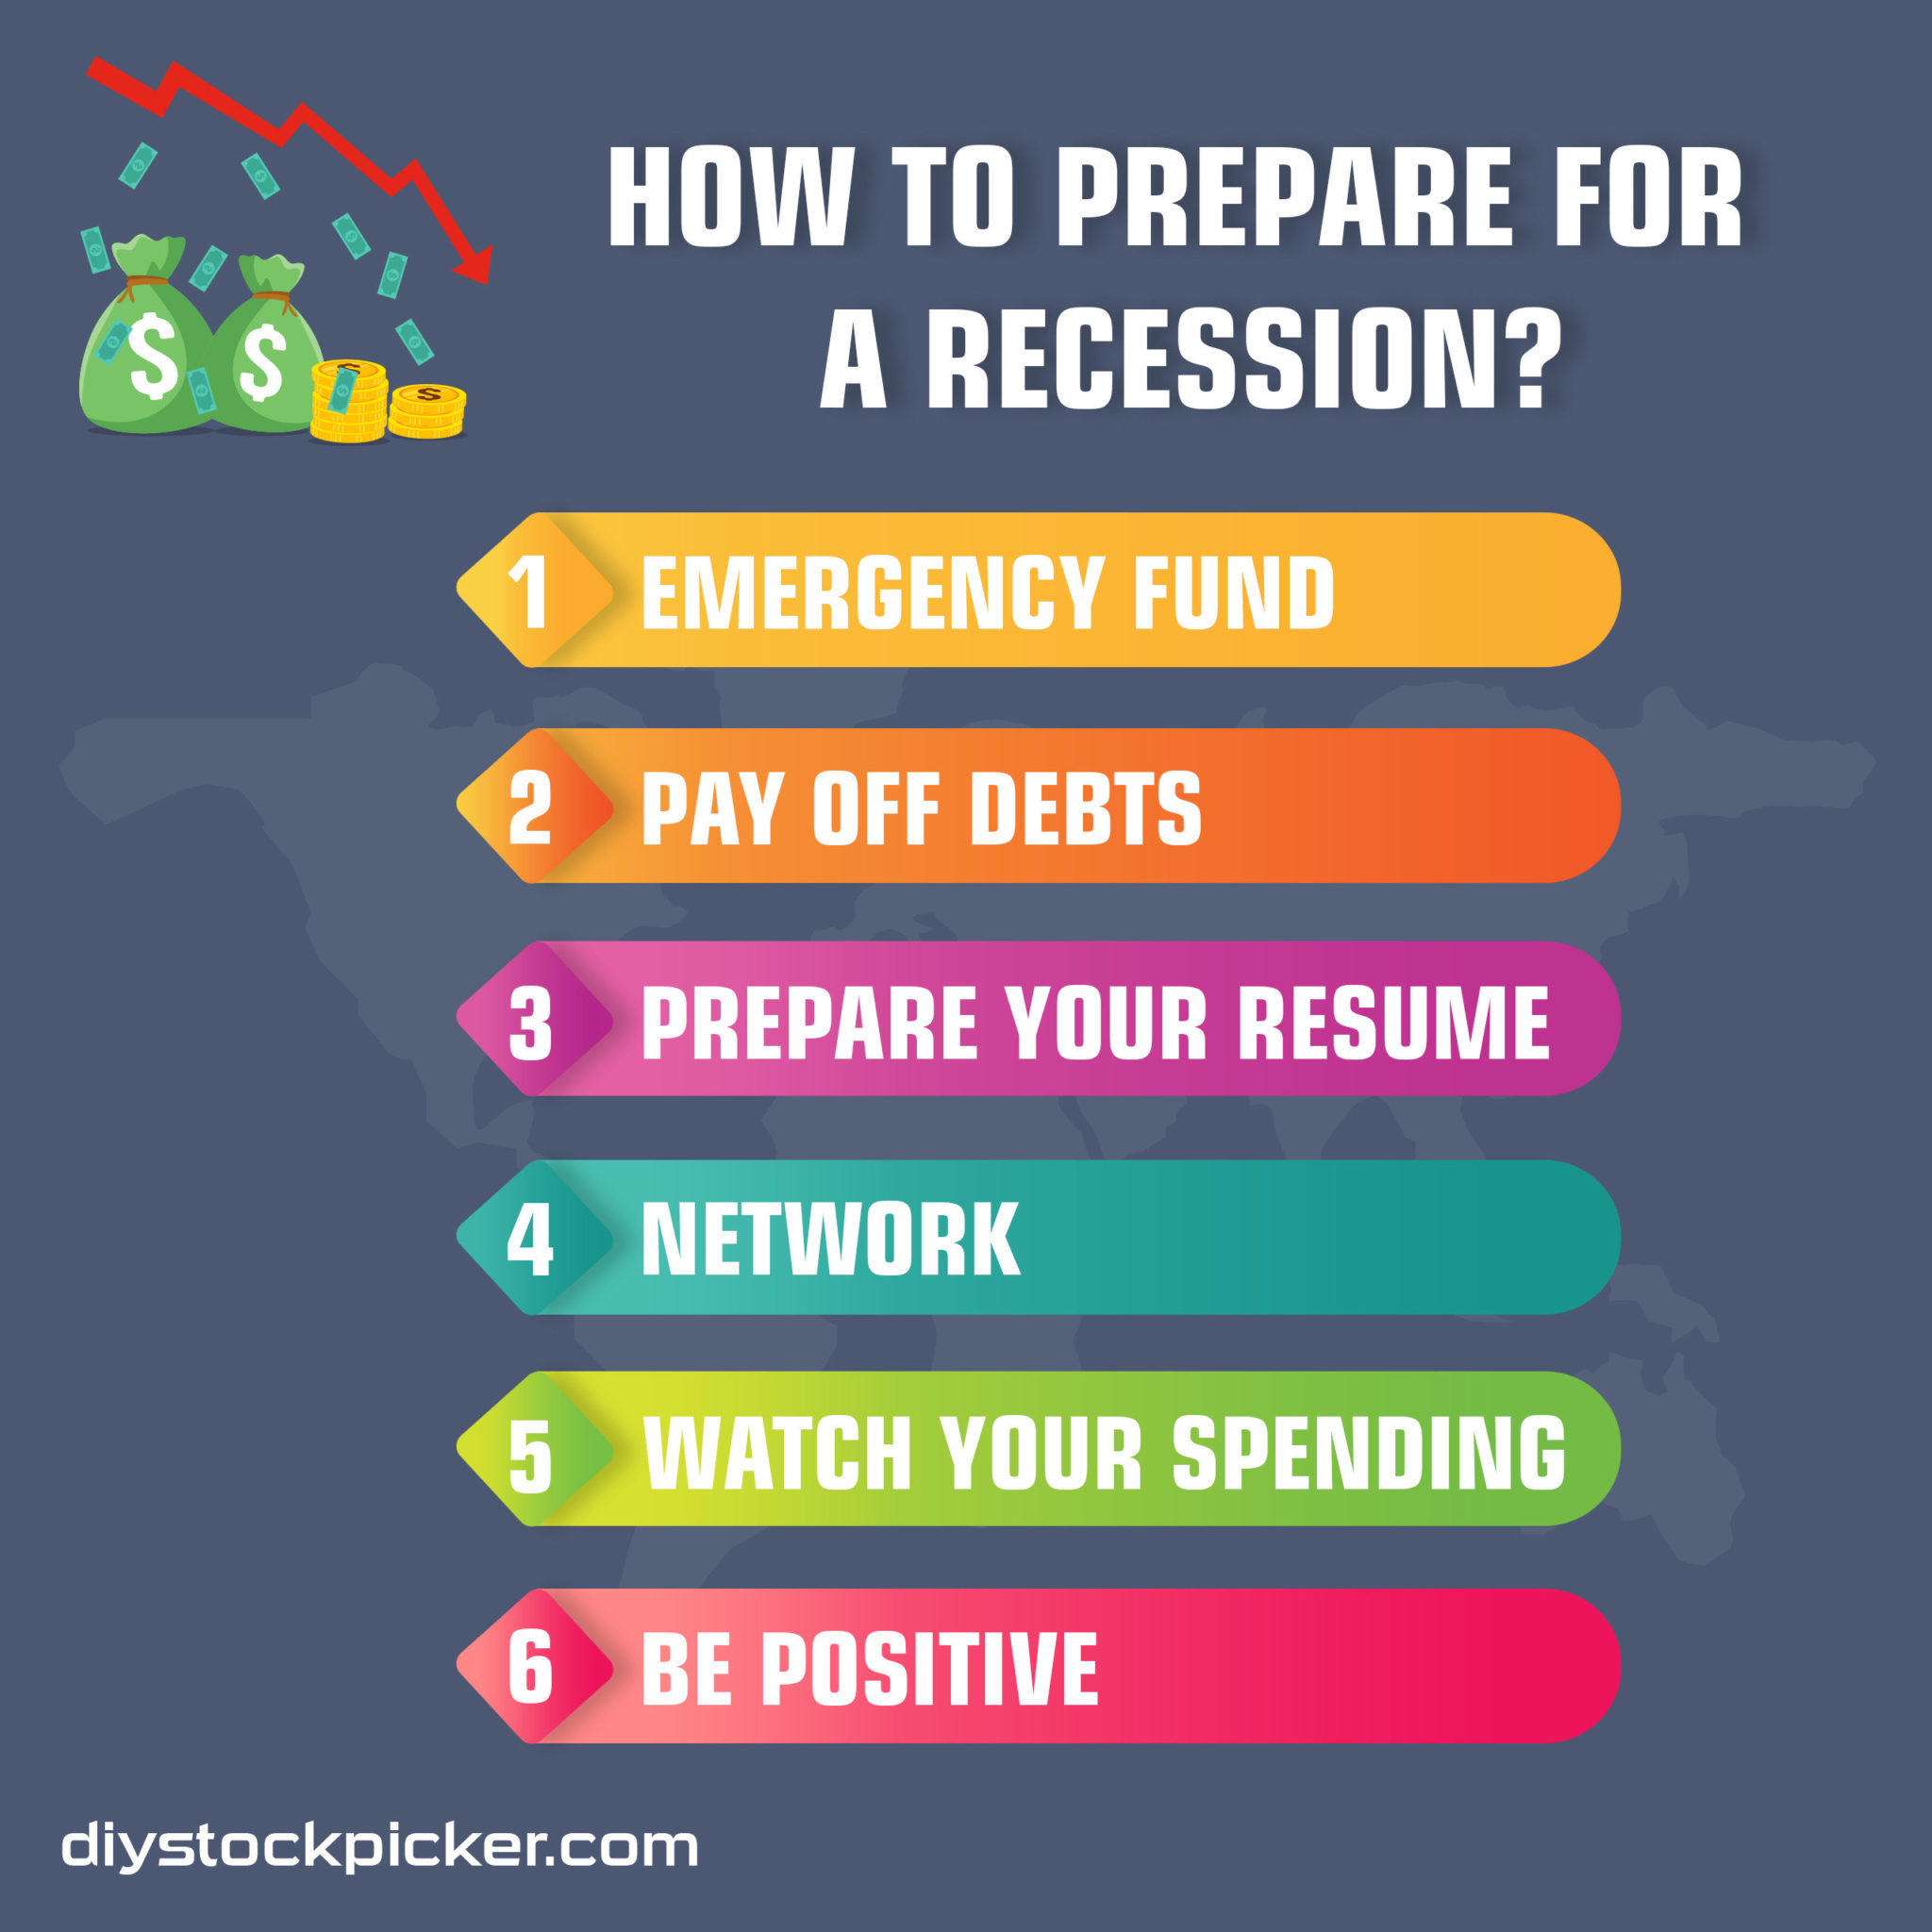 How to prepare for a Recession? DIY Stock Picker